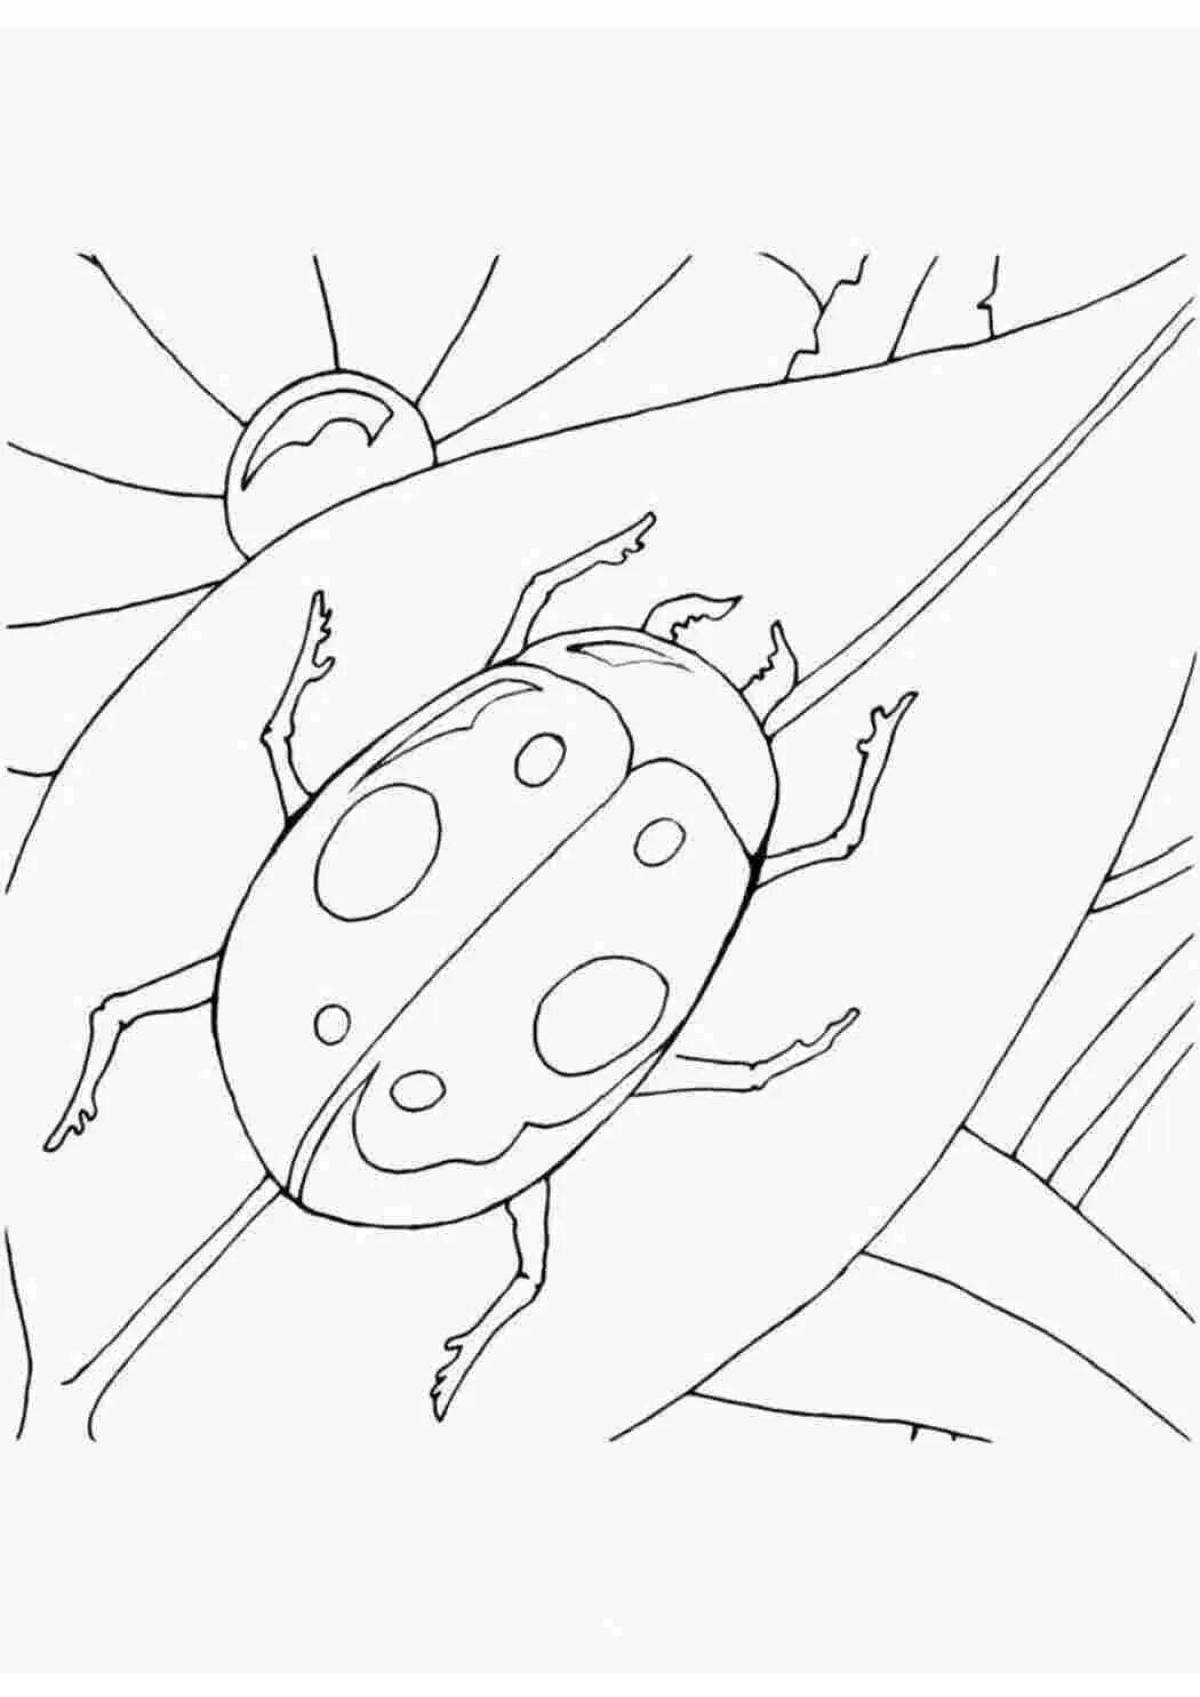 Dazzling beetle coloring book